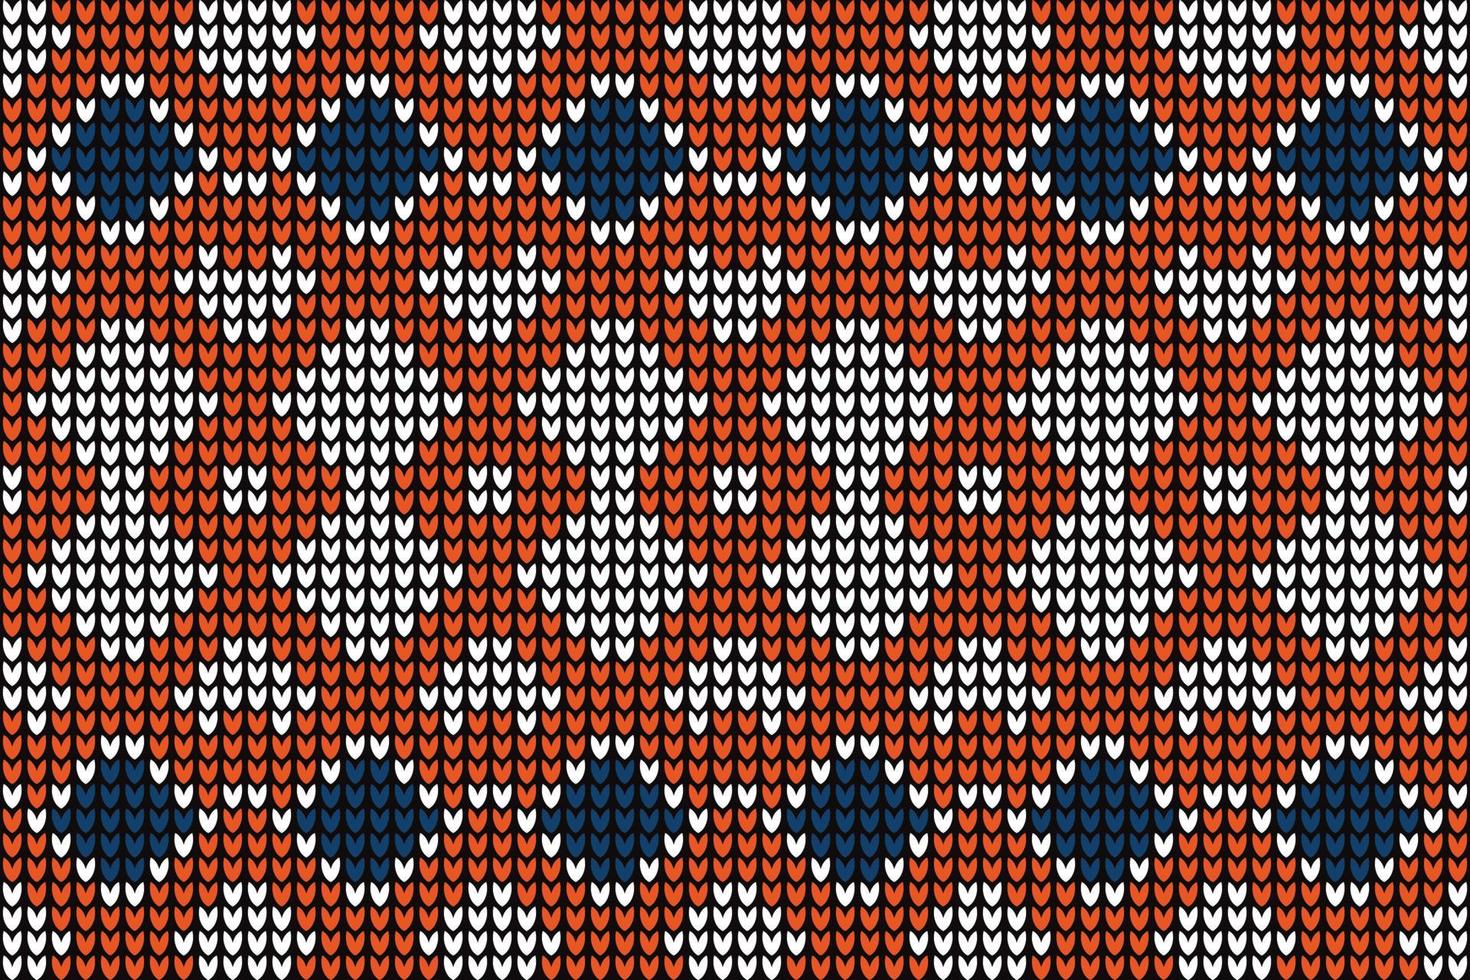 knitting pattern knitted fabric as background. vector